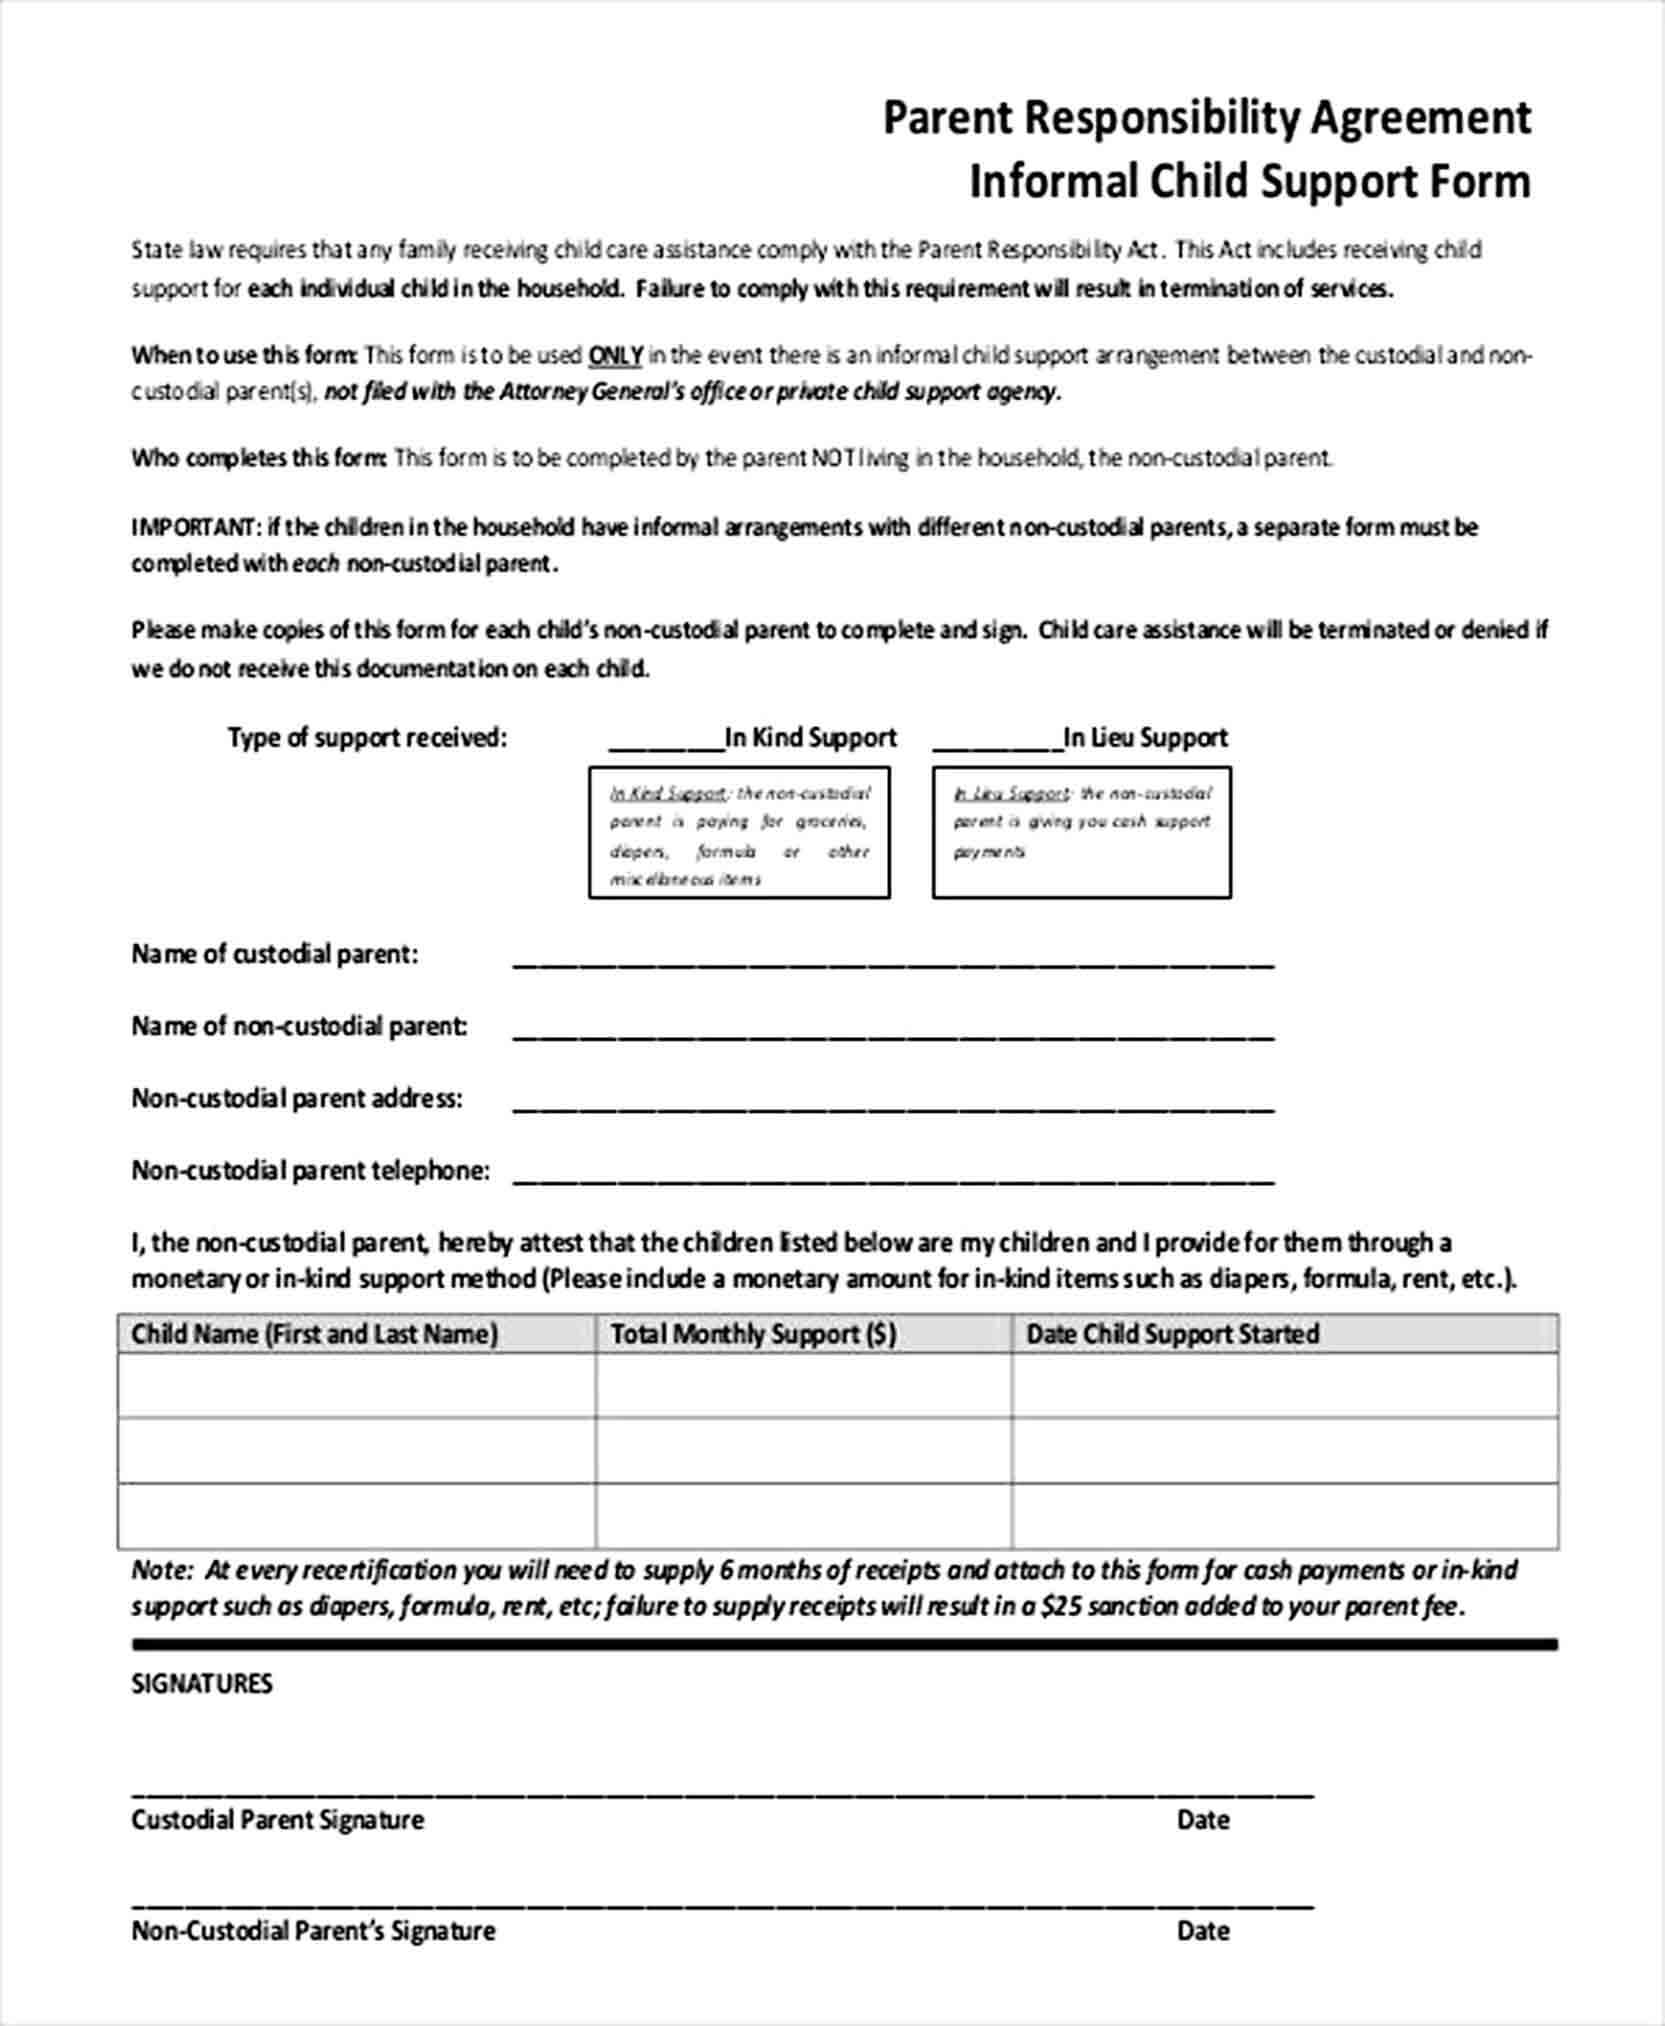 Sample Informal Child Support Agreement Template